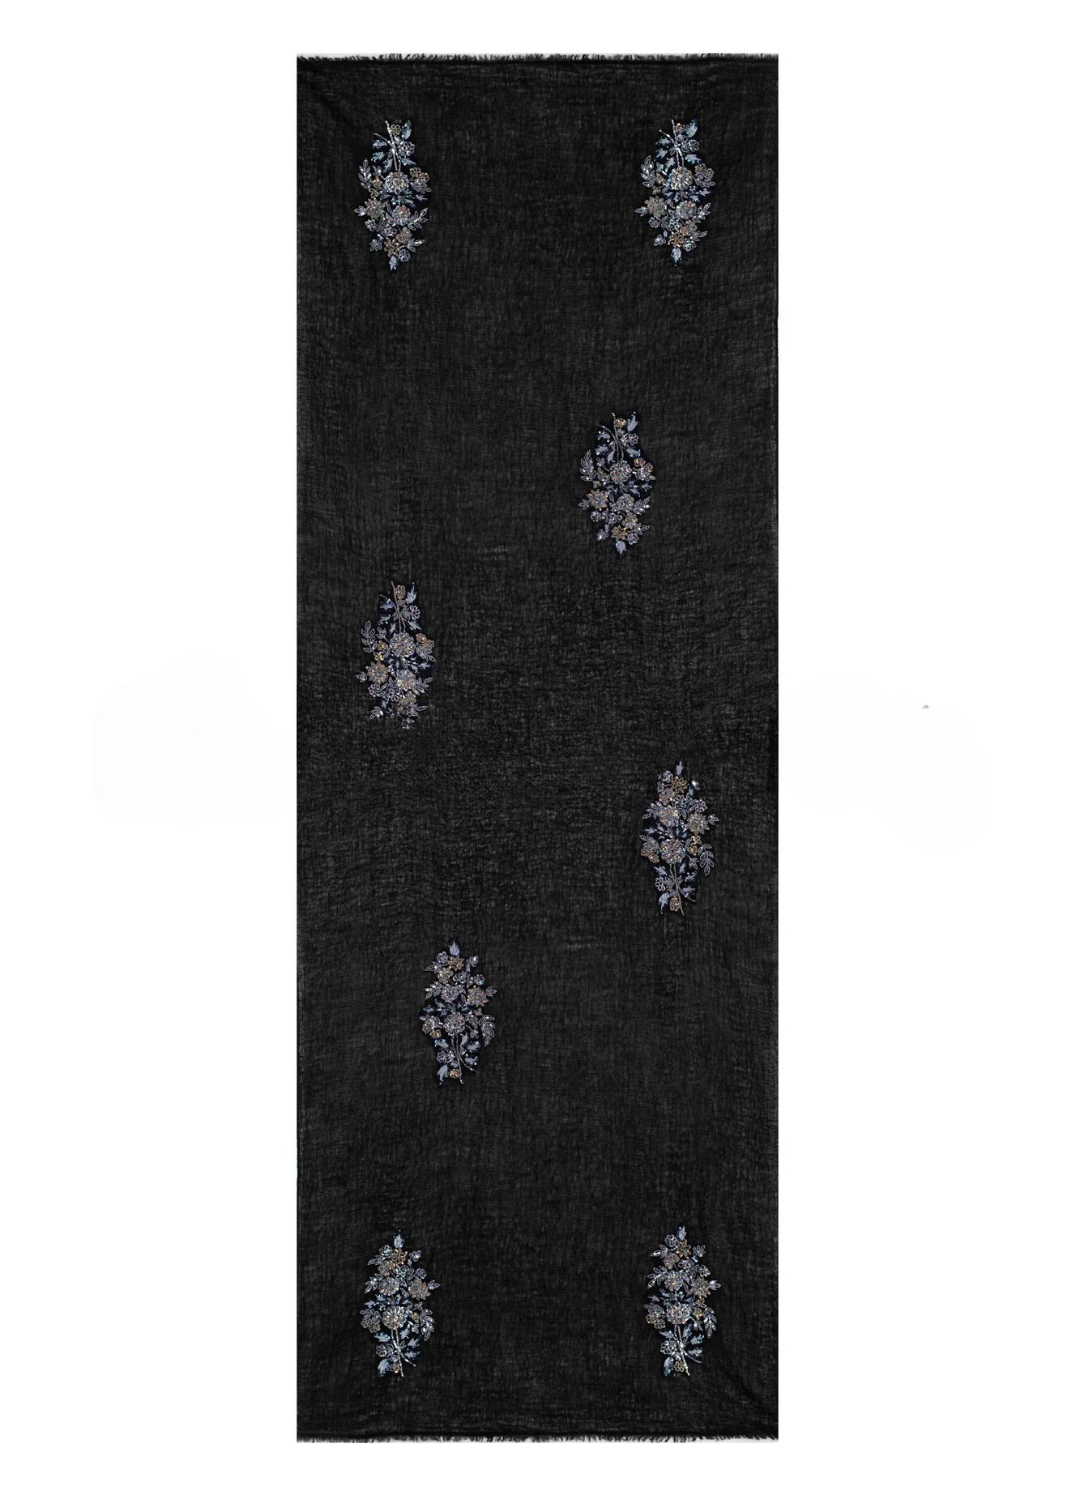 Sparge Cashmere Embroidery Sequence Shawls - Black